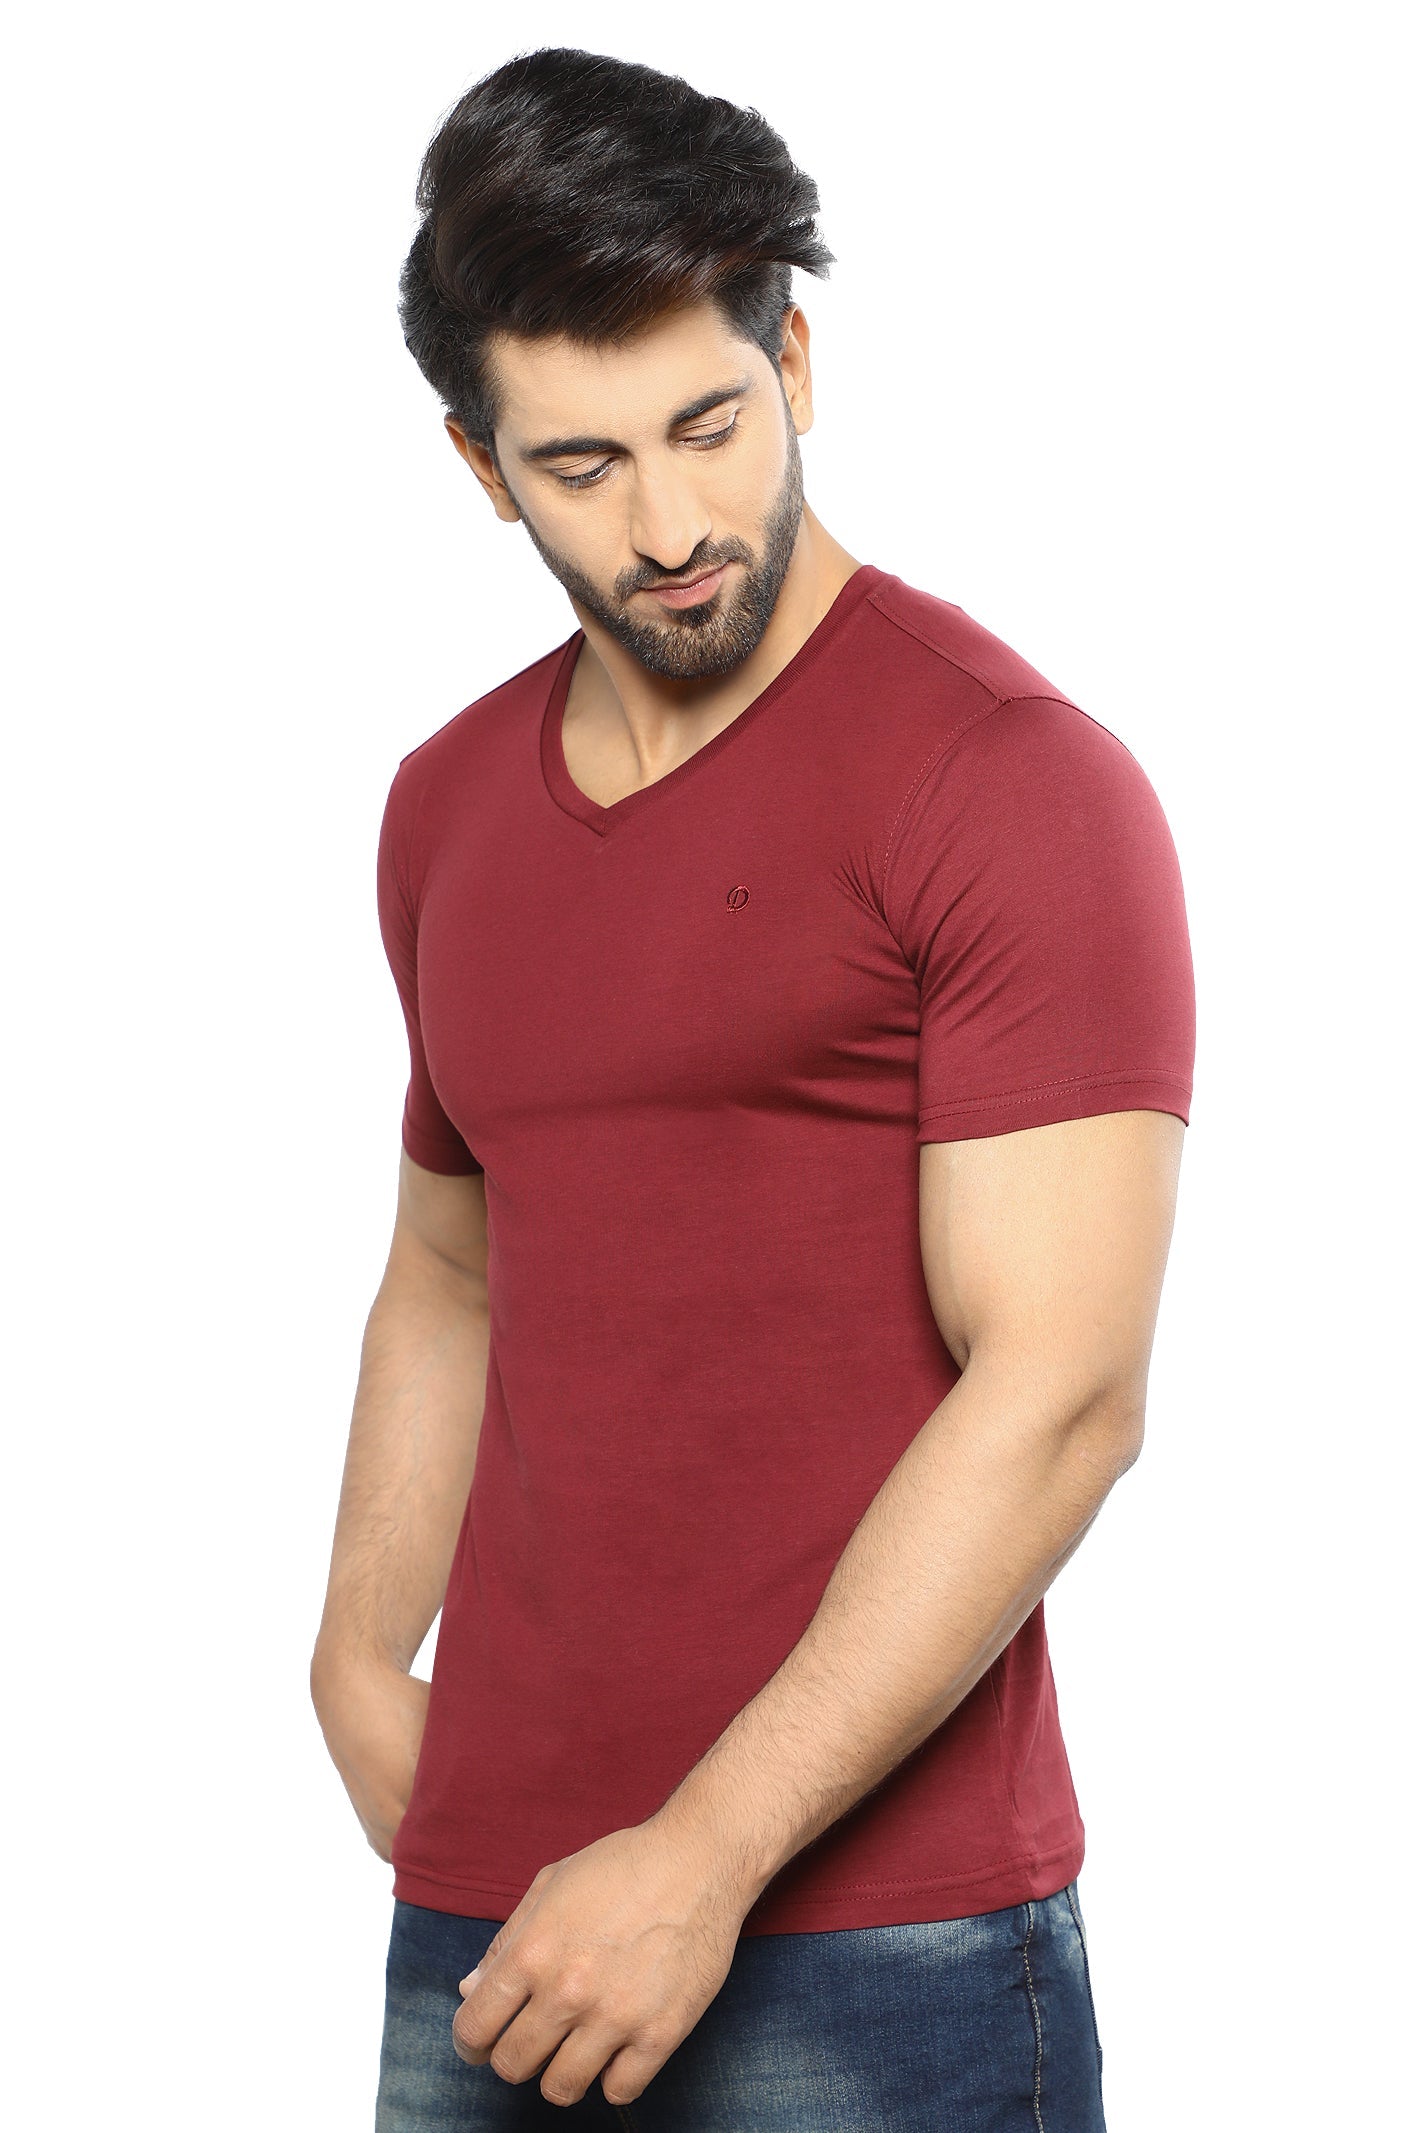 Diners Men's Round Neck T-Shirt SKU: NA857-MAROON - Diners